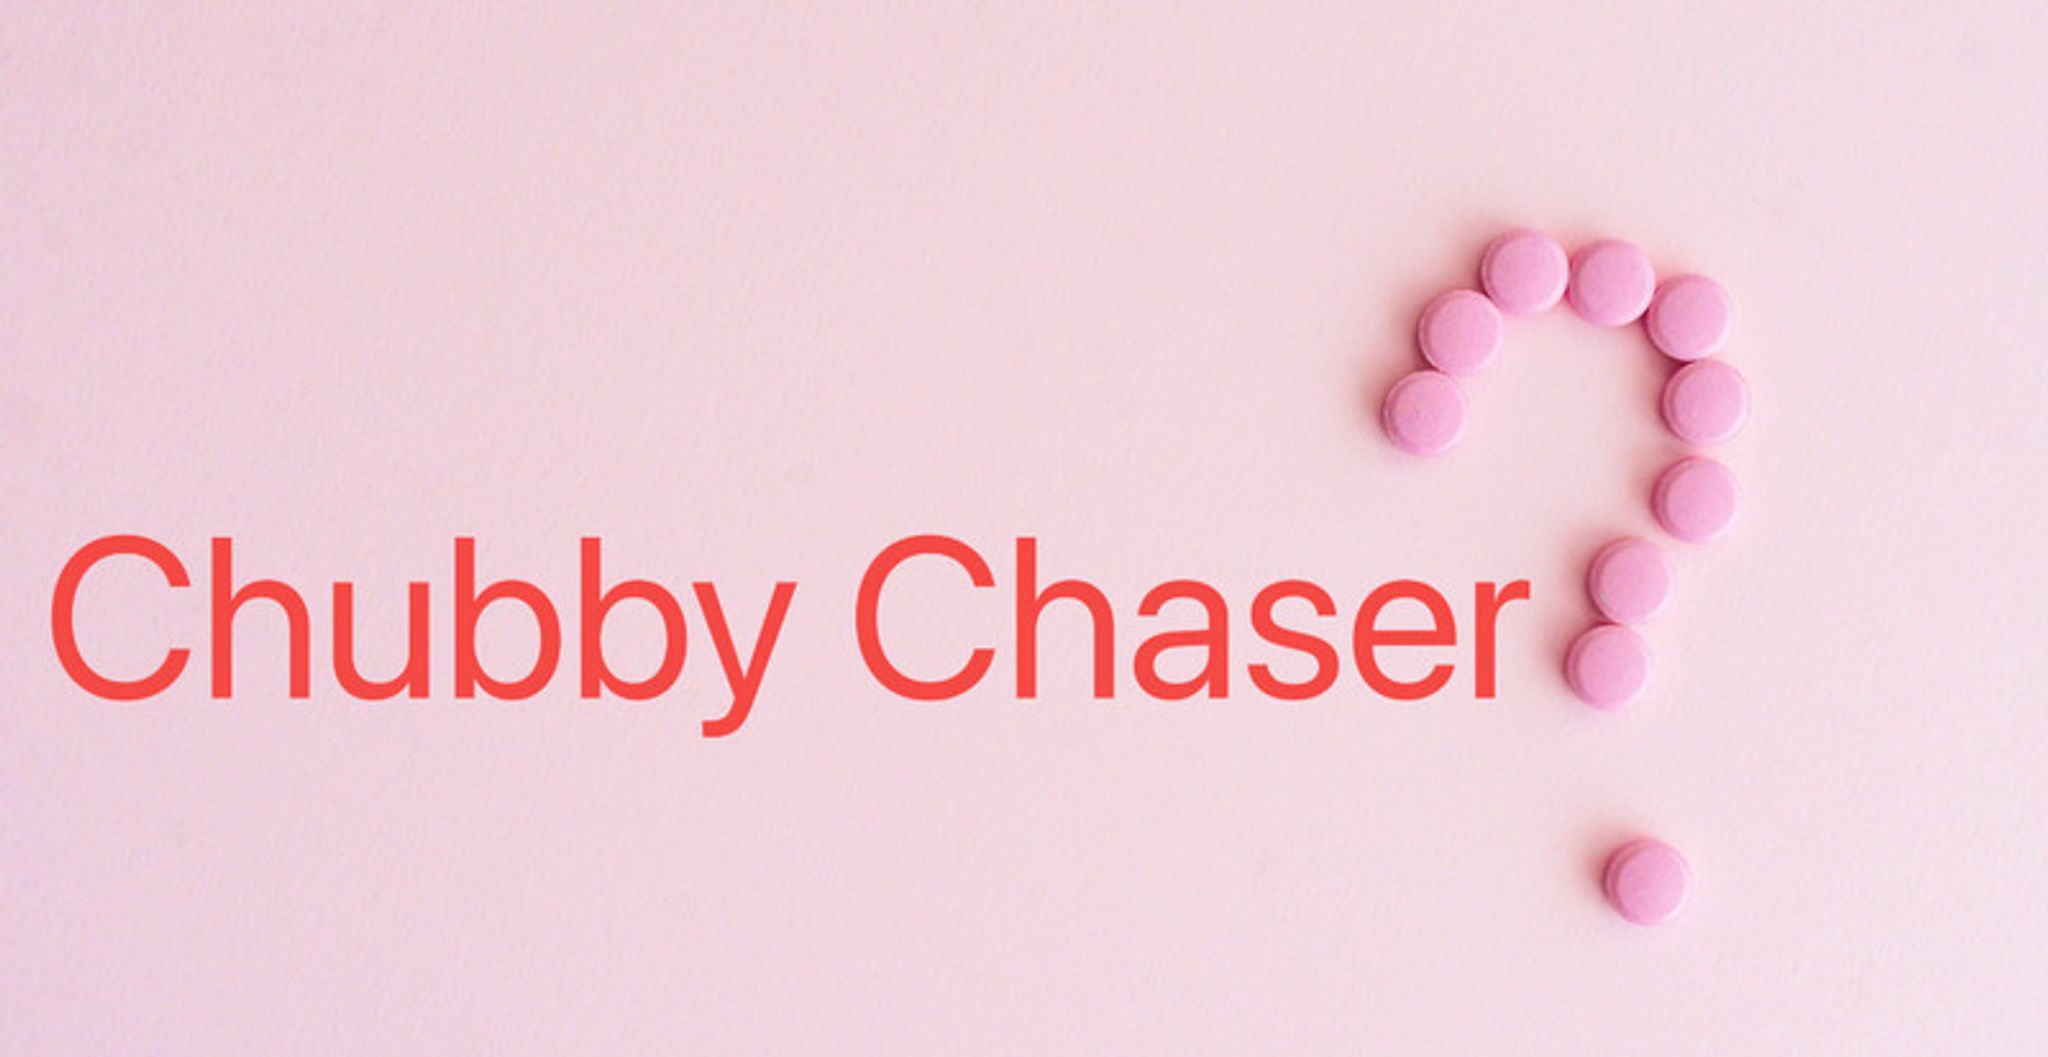 chubby chaser